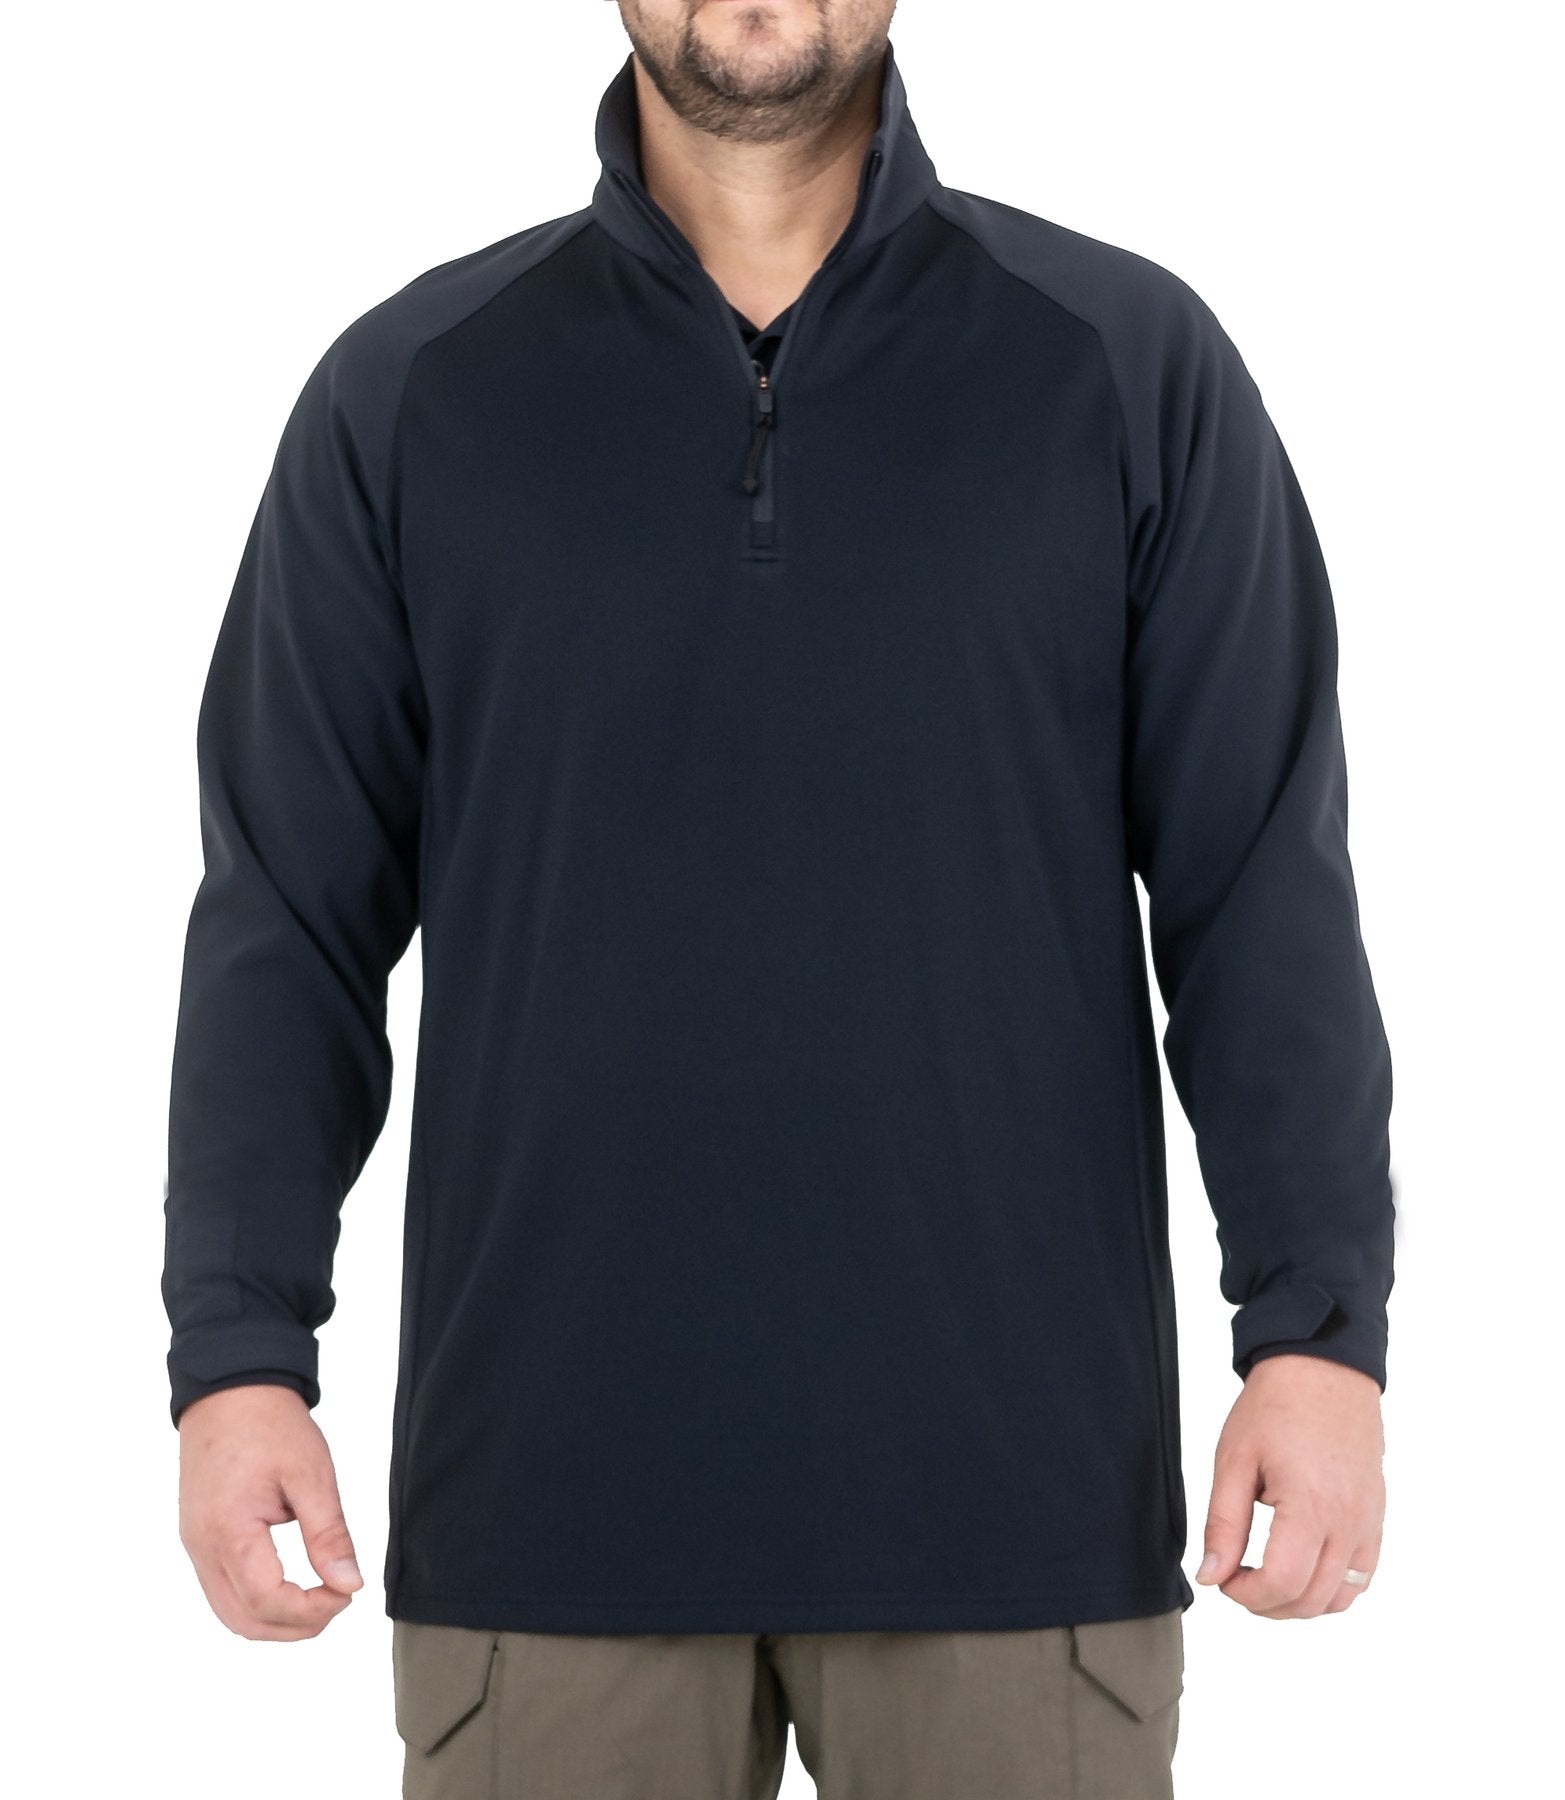 First Tactical Men's Pro Duty Pullover